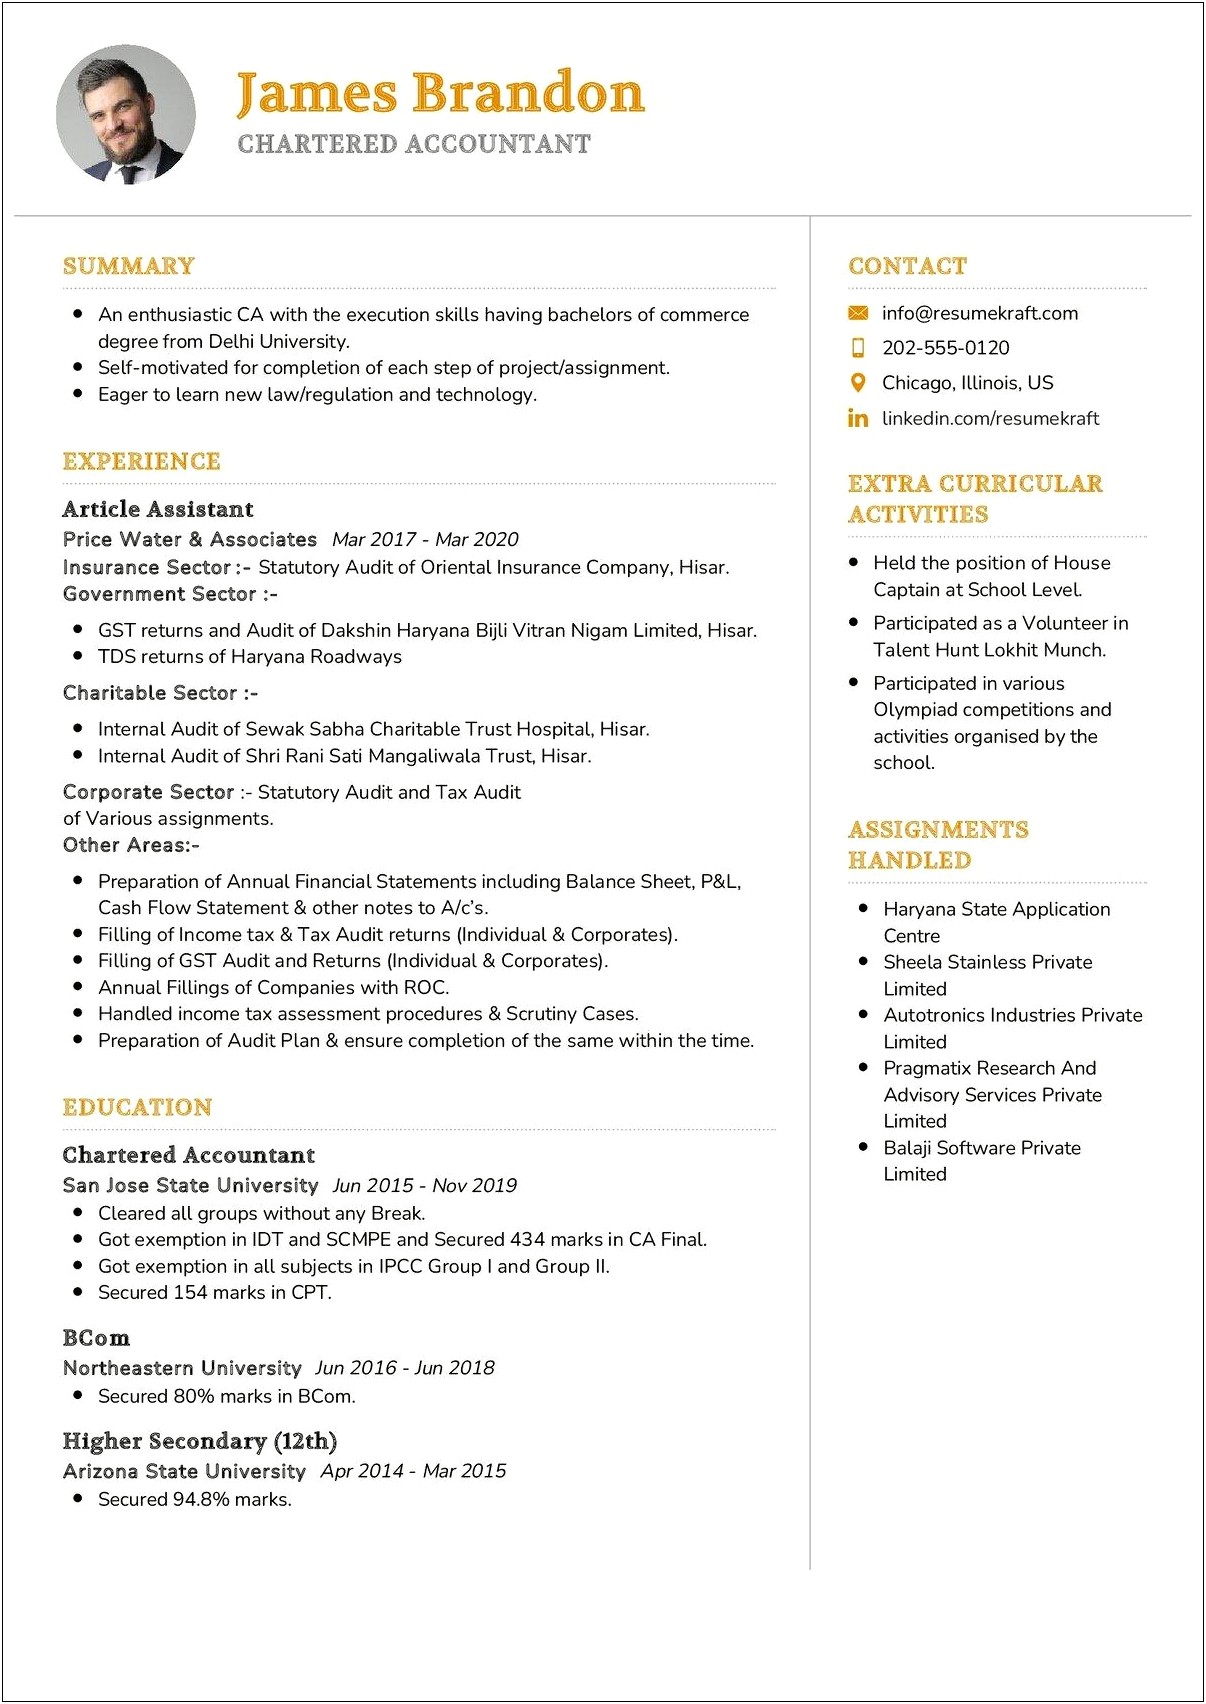 Skills Of Chartered Accountant In Resume